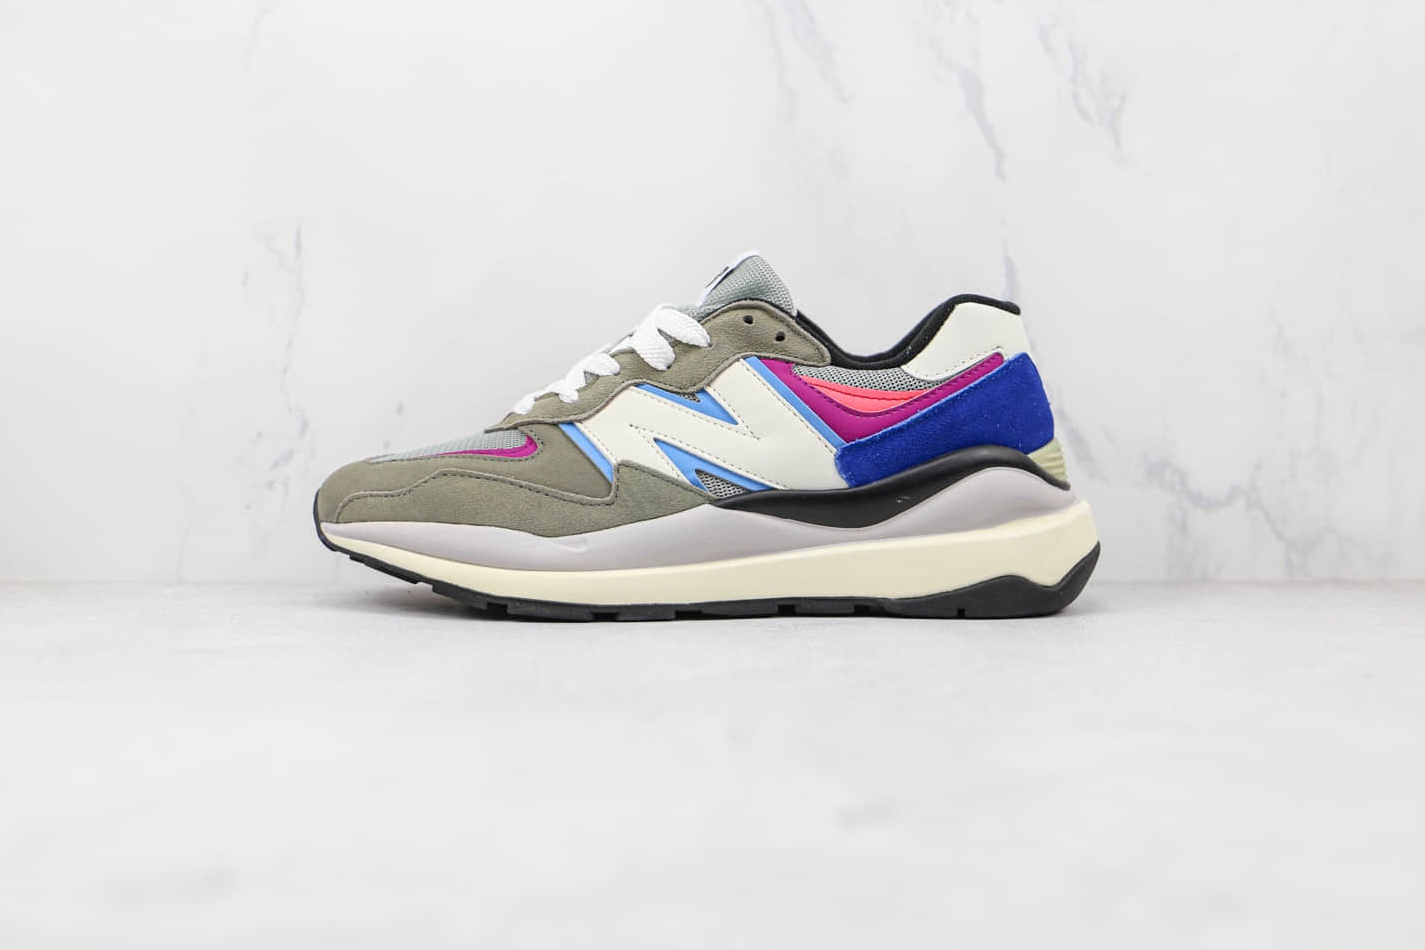 New Balance 57 40 'Incubation Pack - Grey Pink Zing' M5740DD1 | Stylish and Comfortable Sneakers